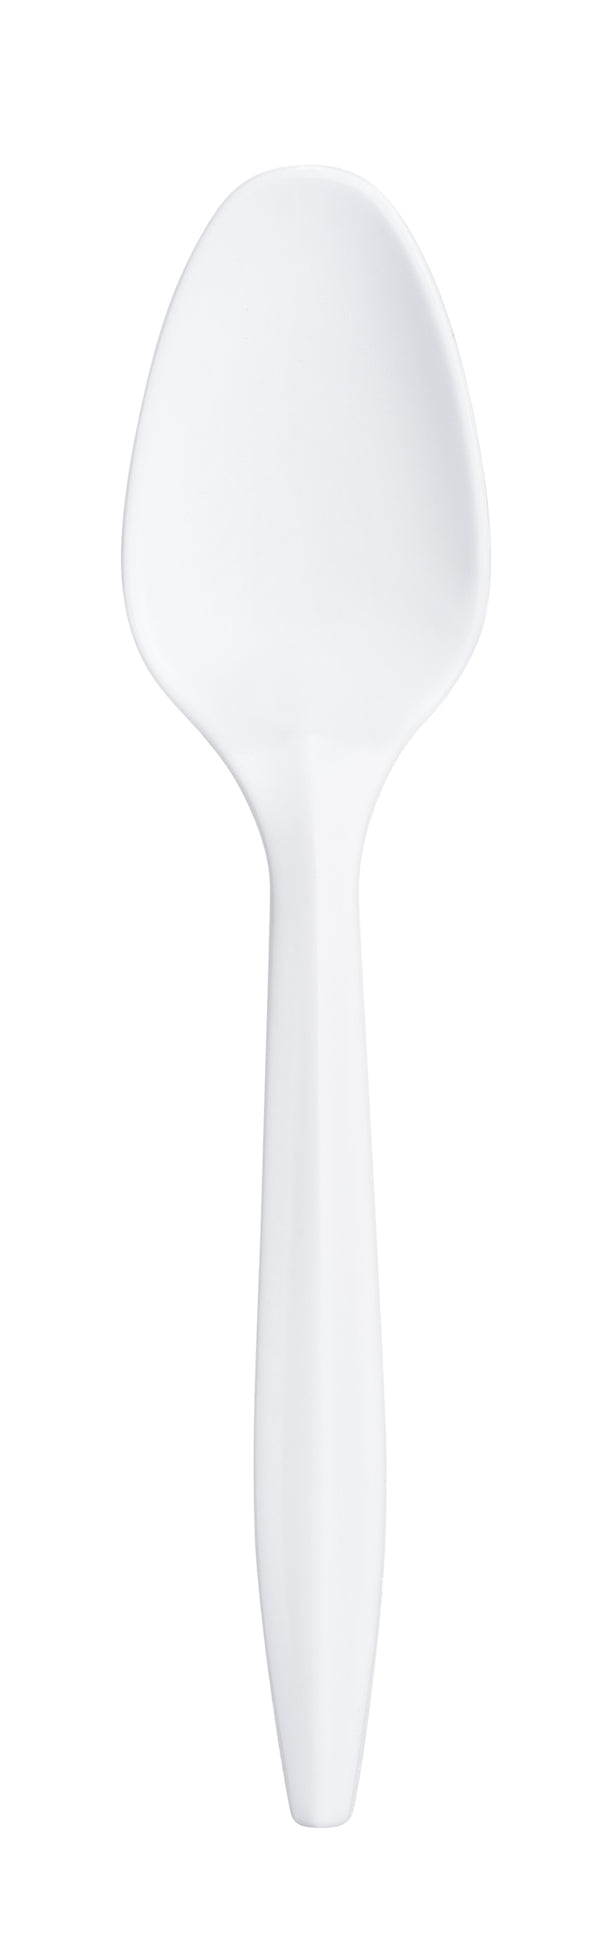 Basic Cutlery Collection White Plastic Flatware - 400 Pack